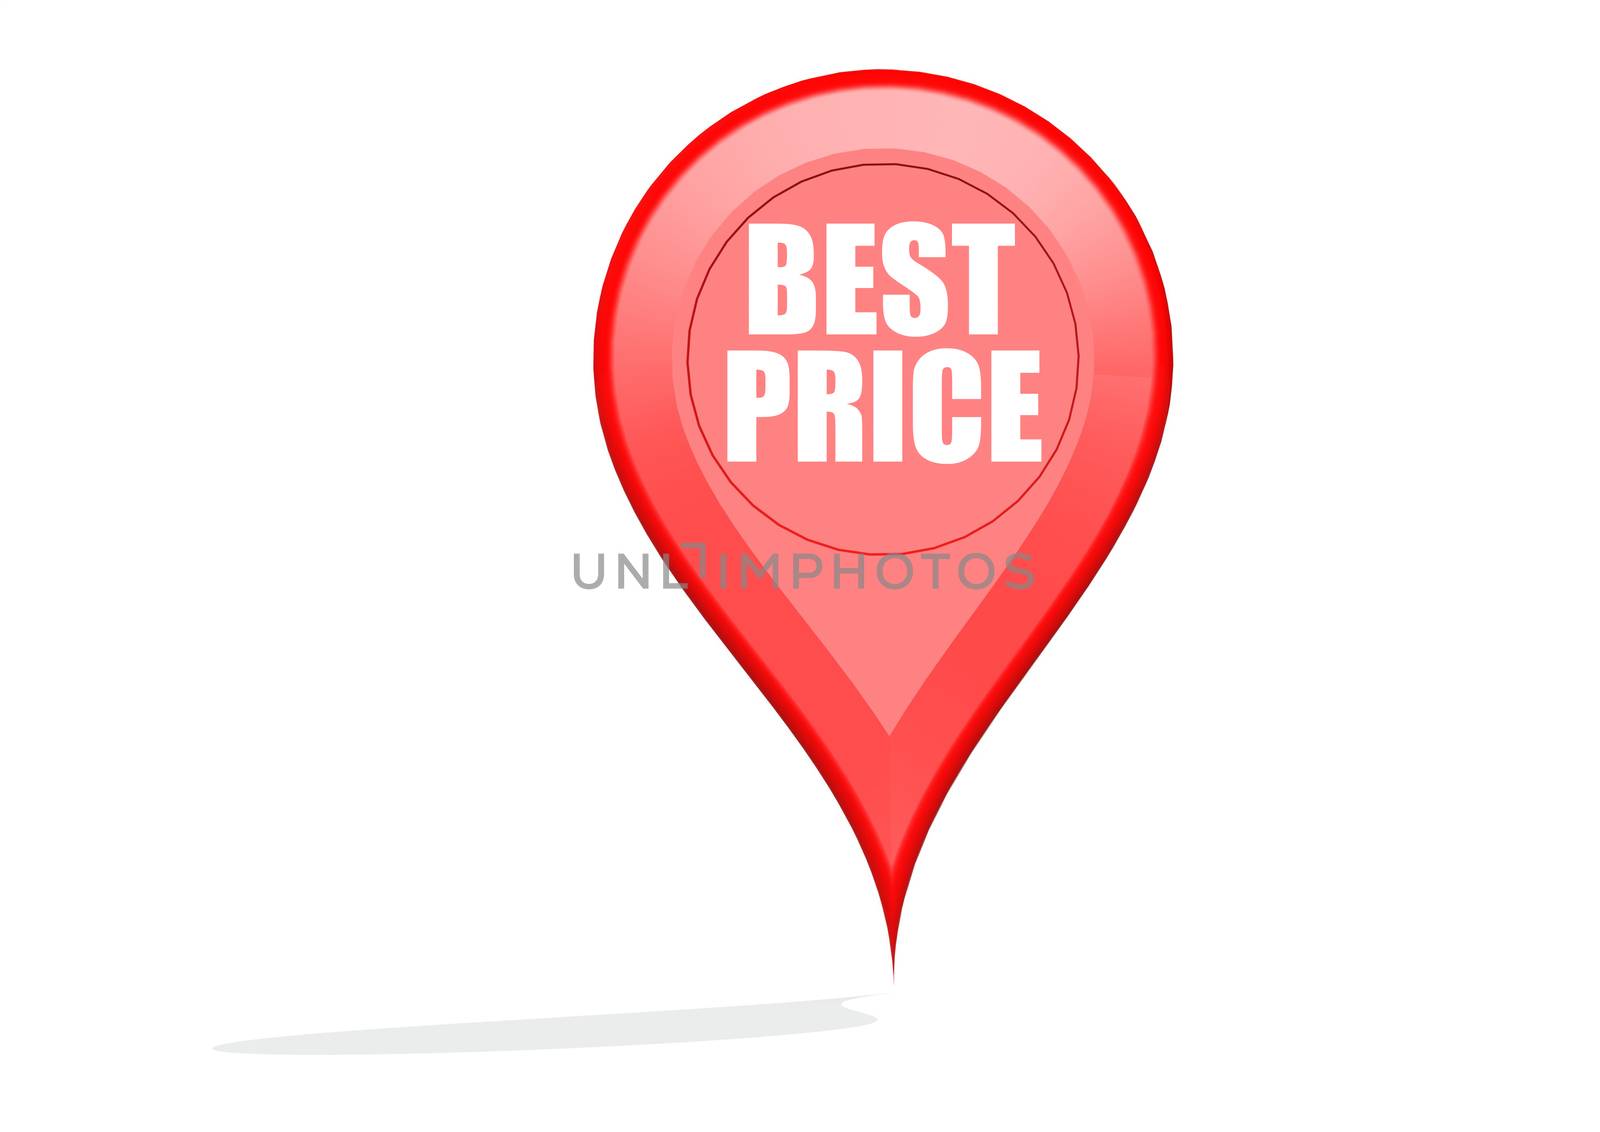 Best price pointer image with hi-res rendered artwork that could be used for any graphic design.